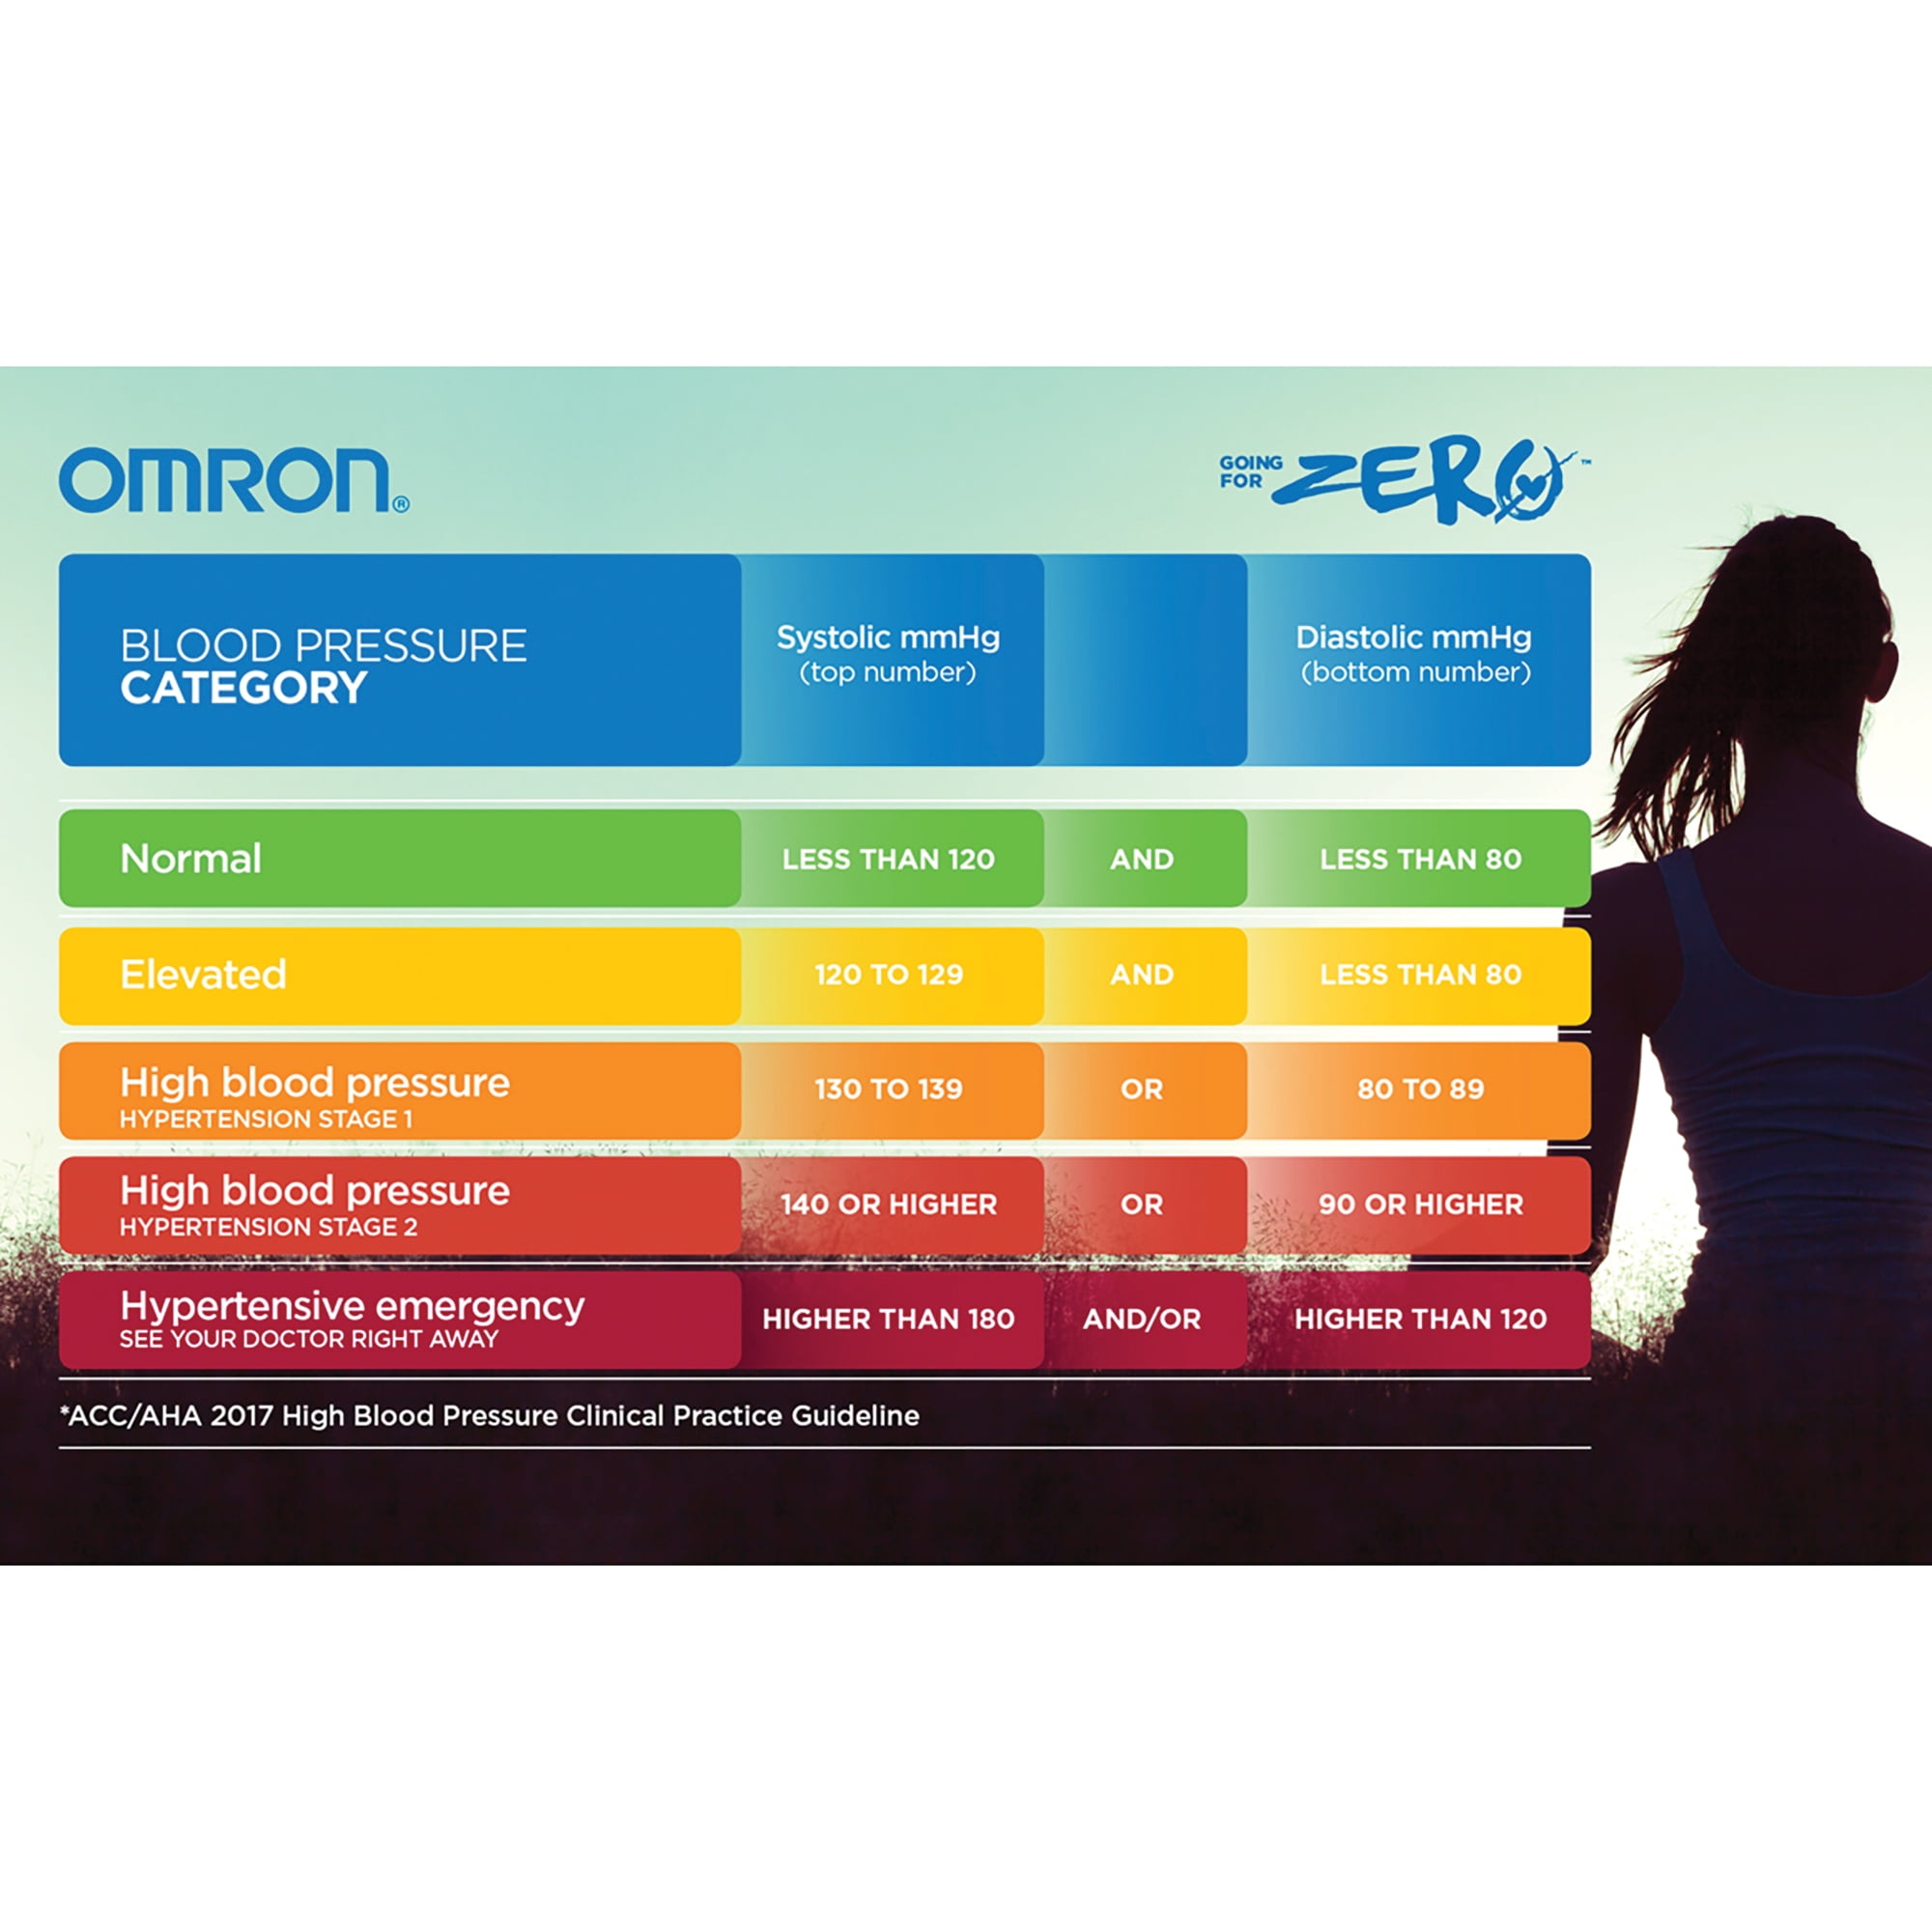 Omron Healthcare Rolls Out Redesigned Line of Best-Selling Blood